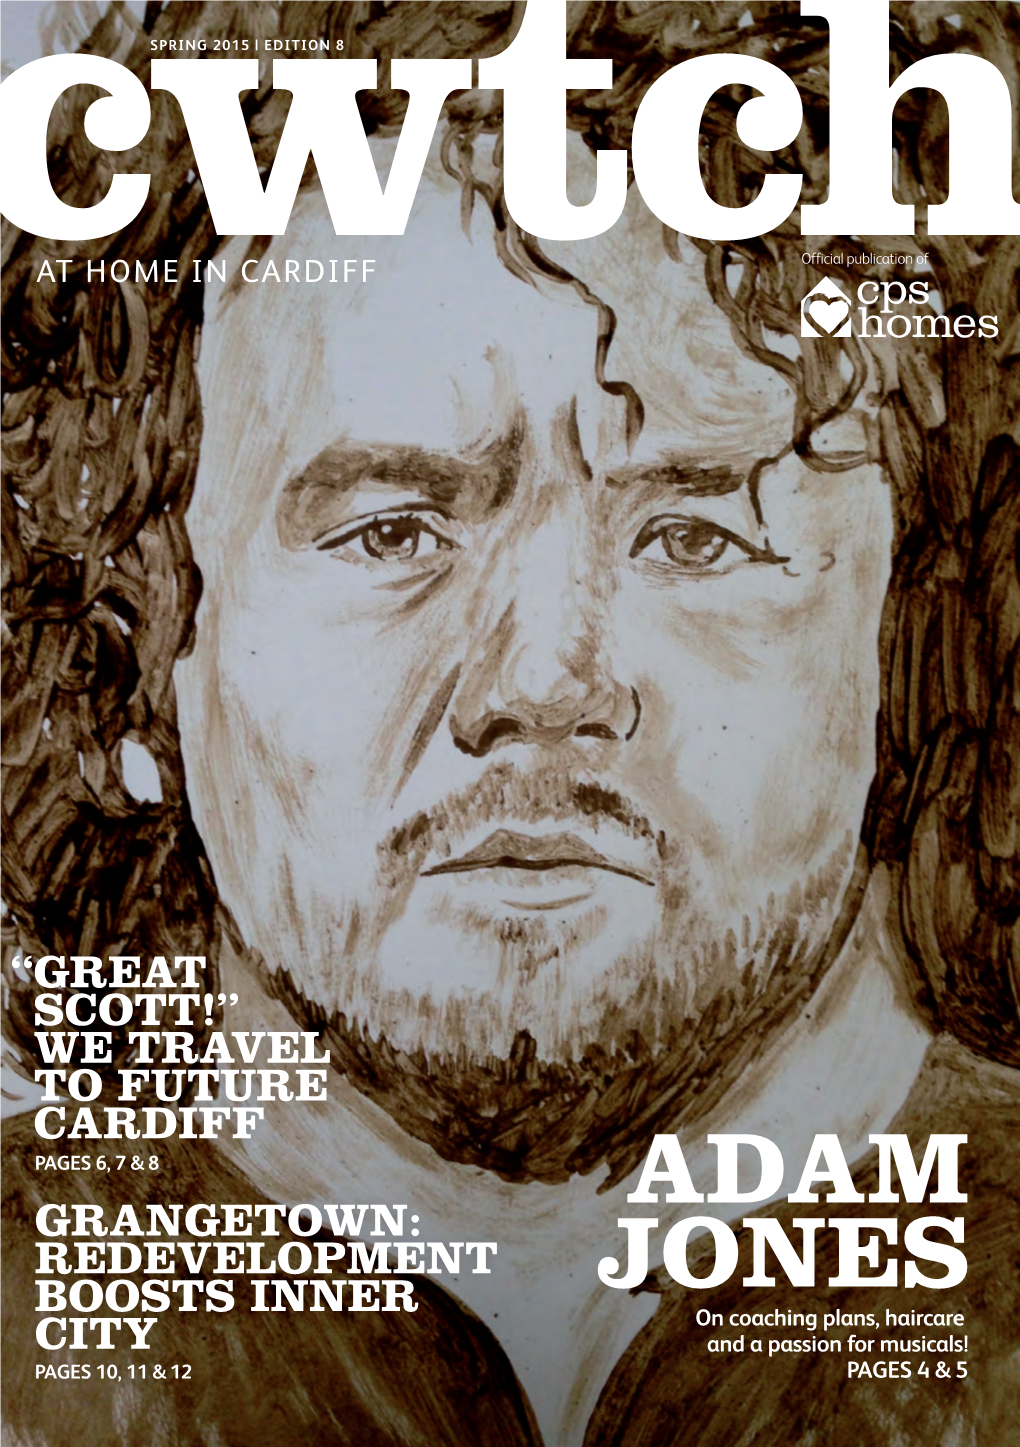 Adam Jones As You’Ve Never Seen Him Before, Courtesy of Local Artist and Britain’S Got Talent Semi-Finalist Nathan Wyburn